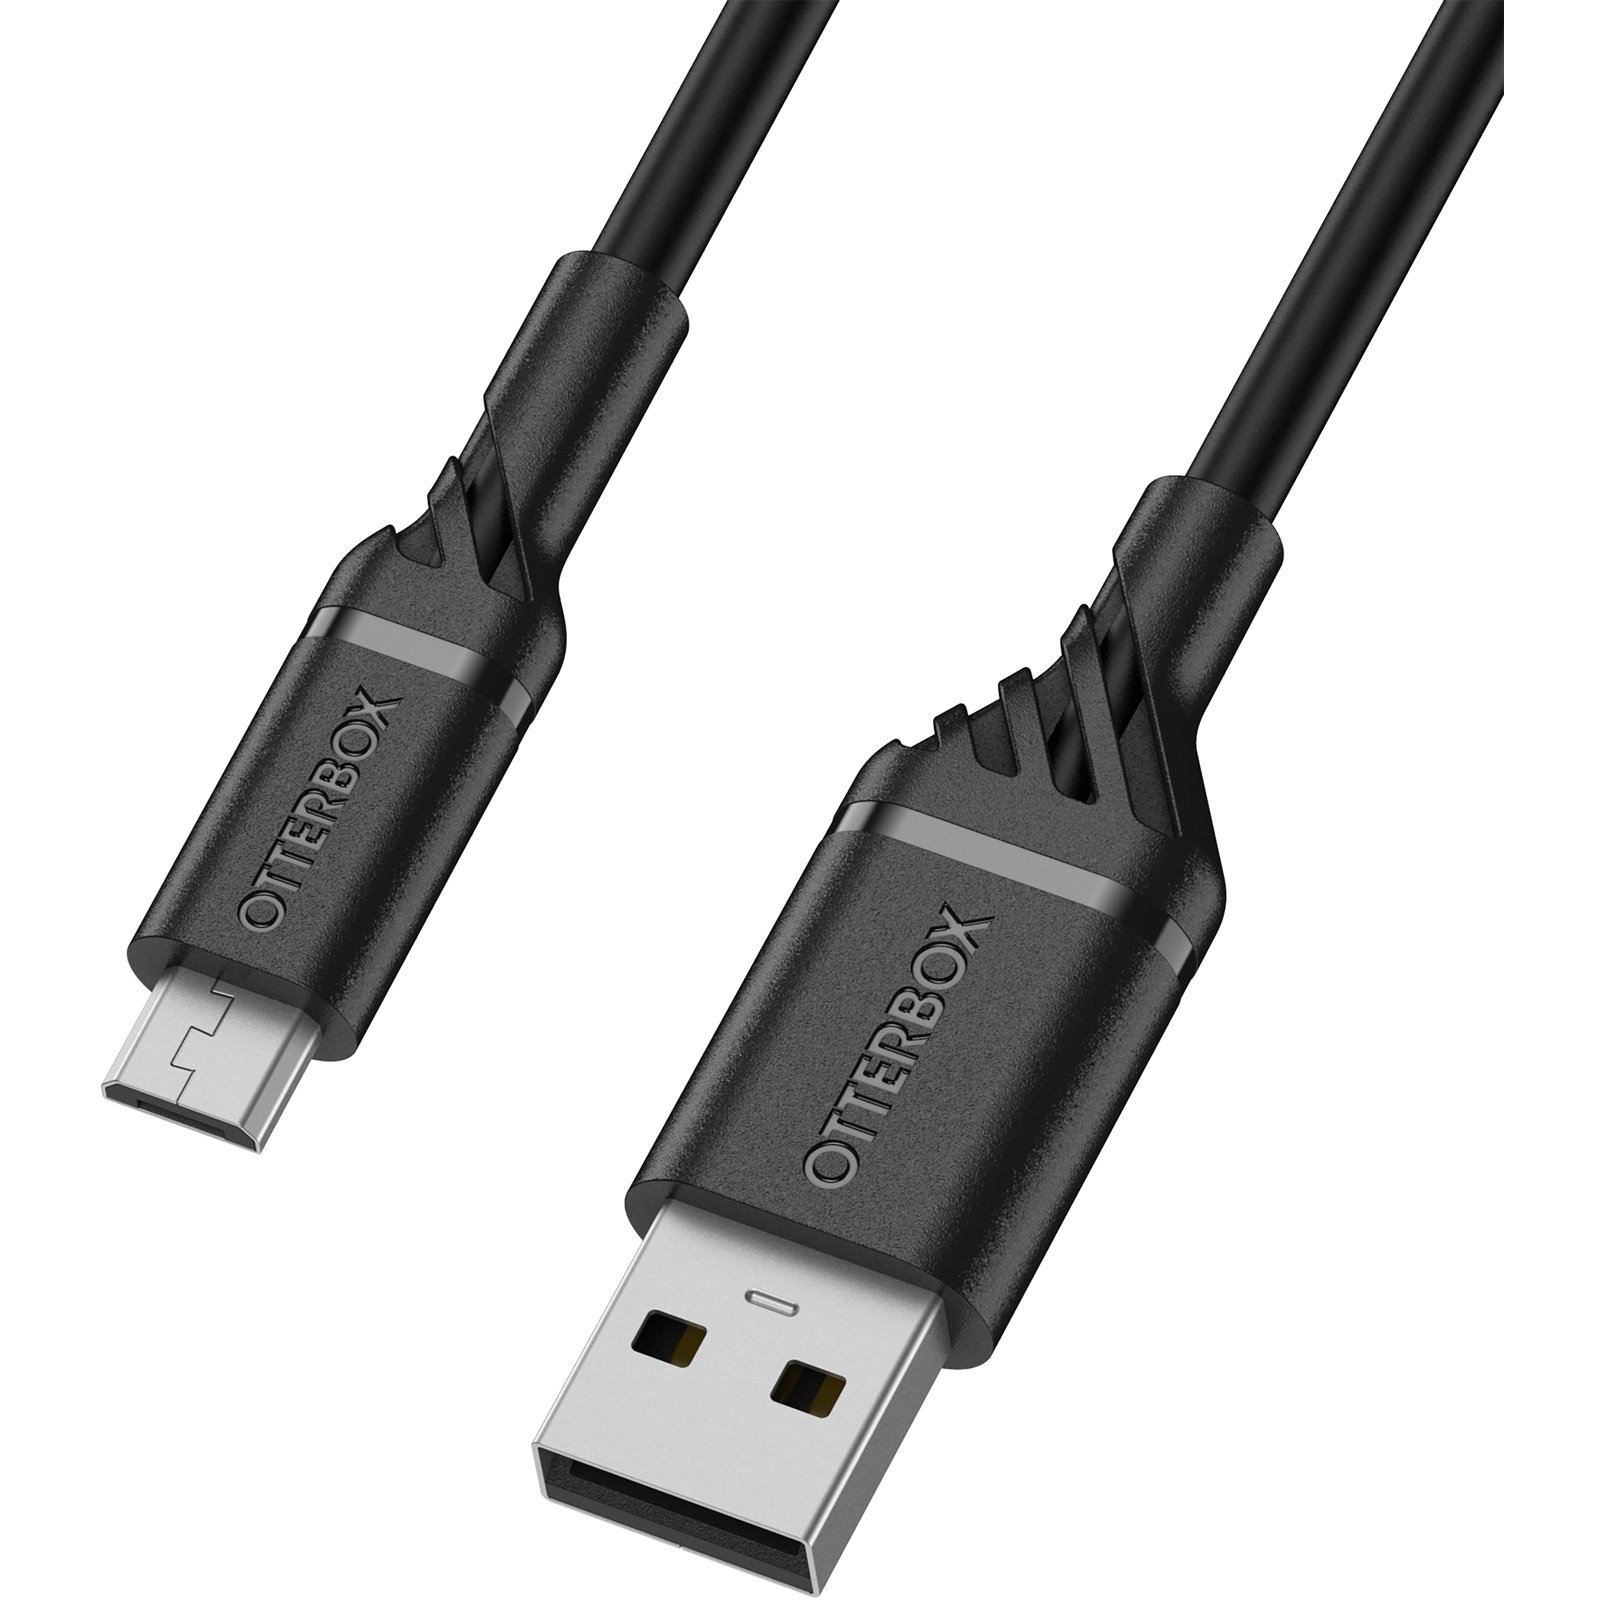 CABLE IPAD TO USB - Aganet Info